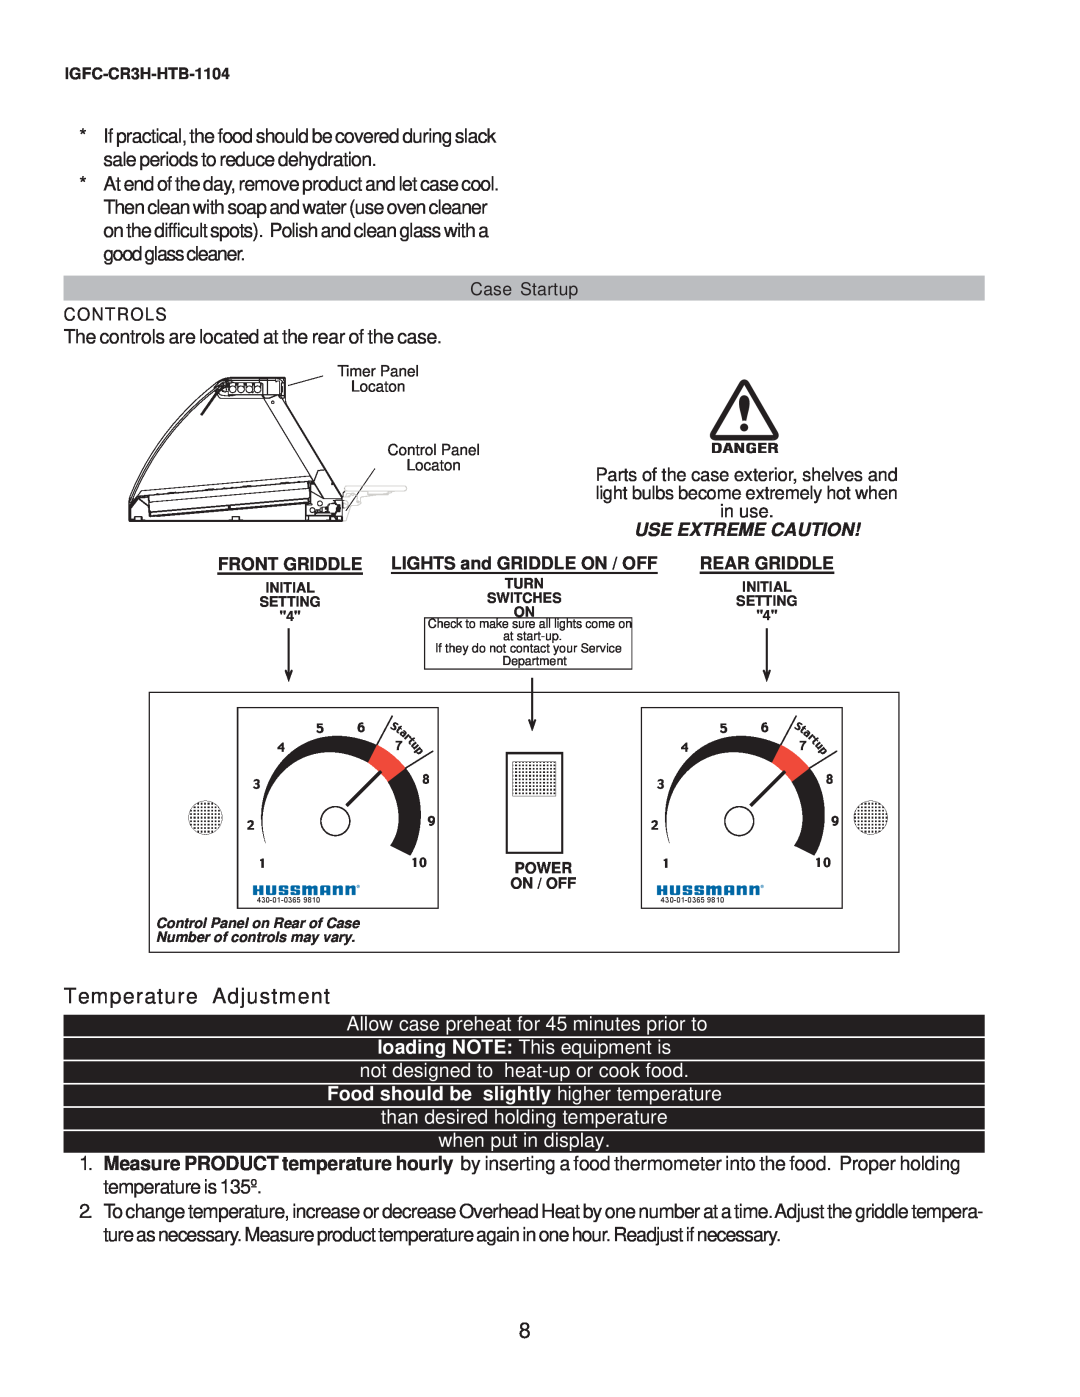 hussman CR3HTO-HTB operation manual Temperature Adjustment, not designed to heat-up or cook food 